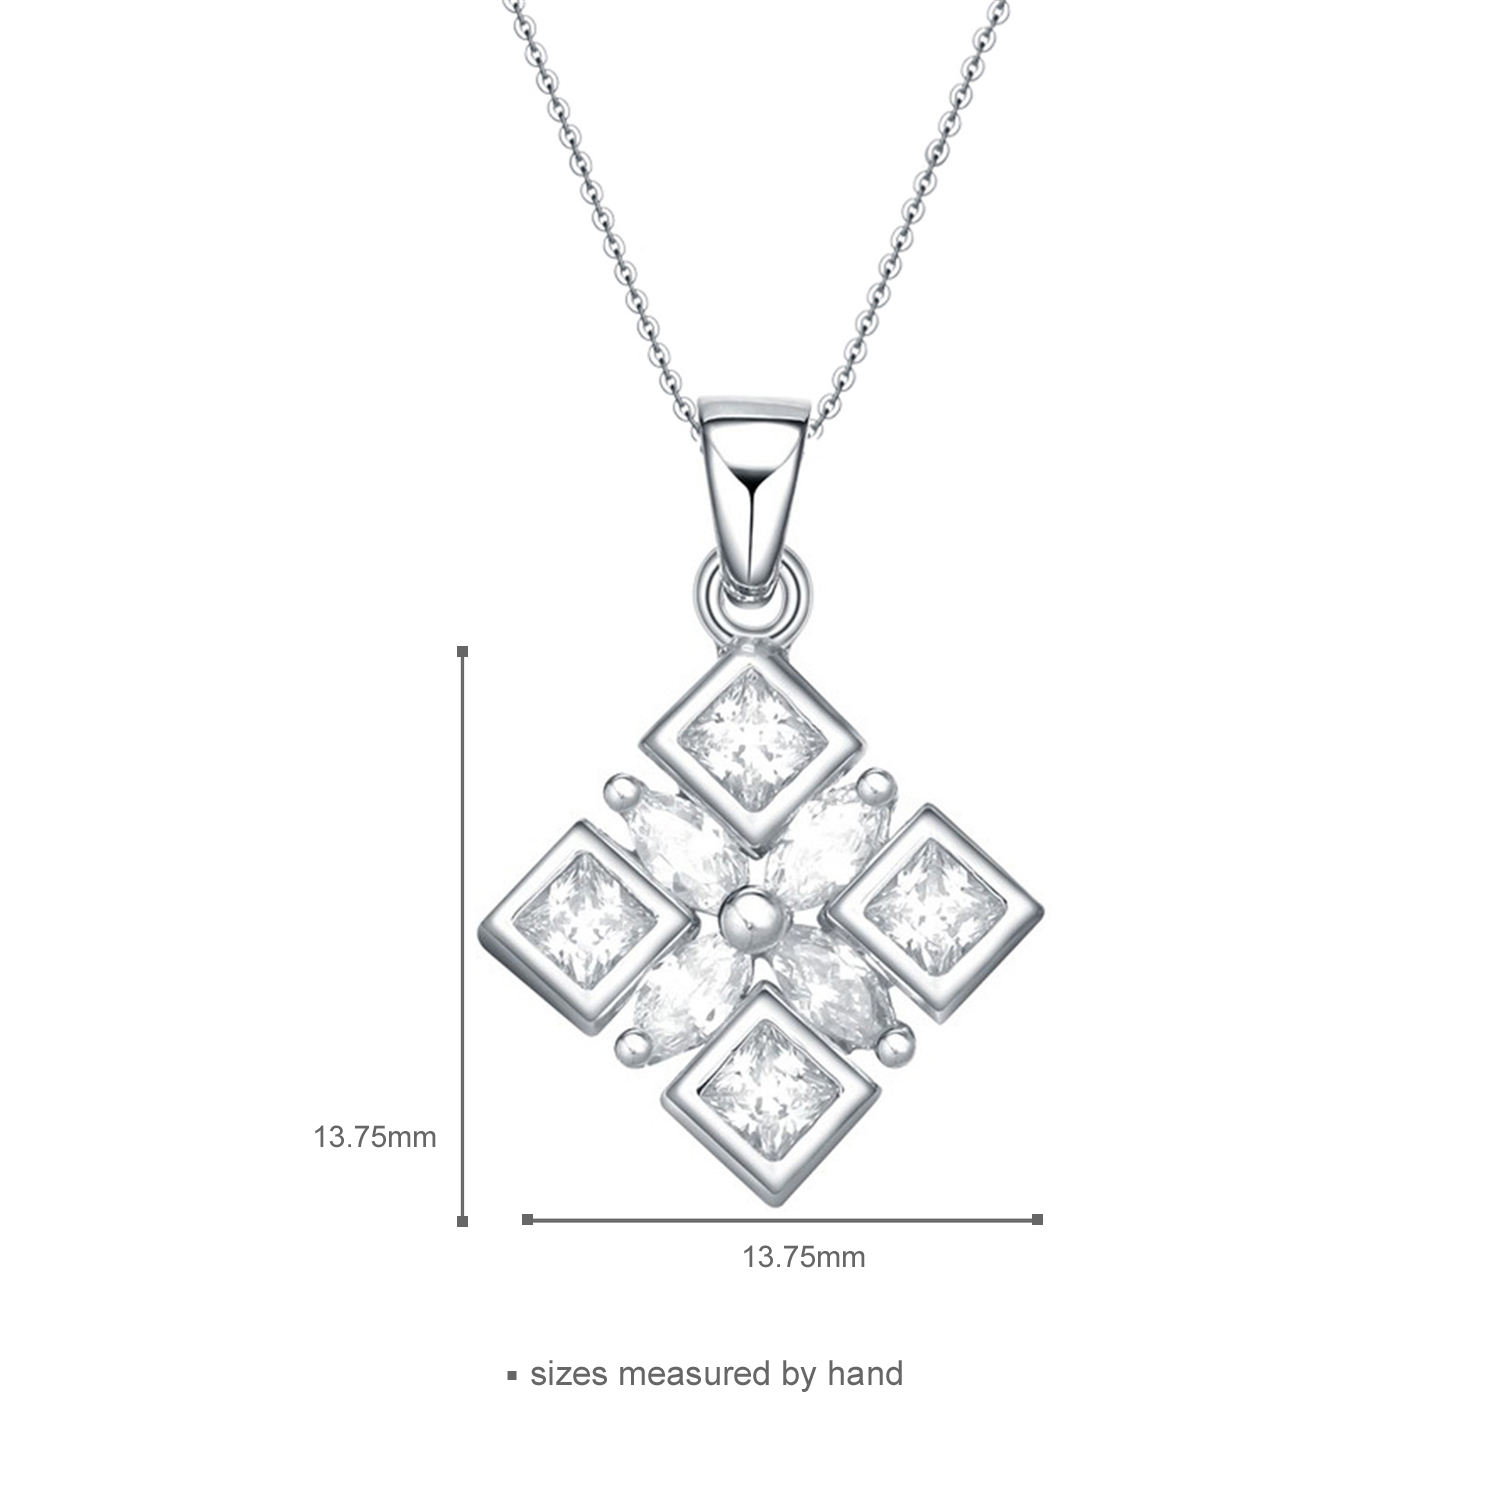  925 Sterling Silver Square Cubic Zircon Pendant Necklace Earrings Light Daily Wearing Jewelry Set(图3)